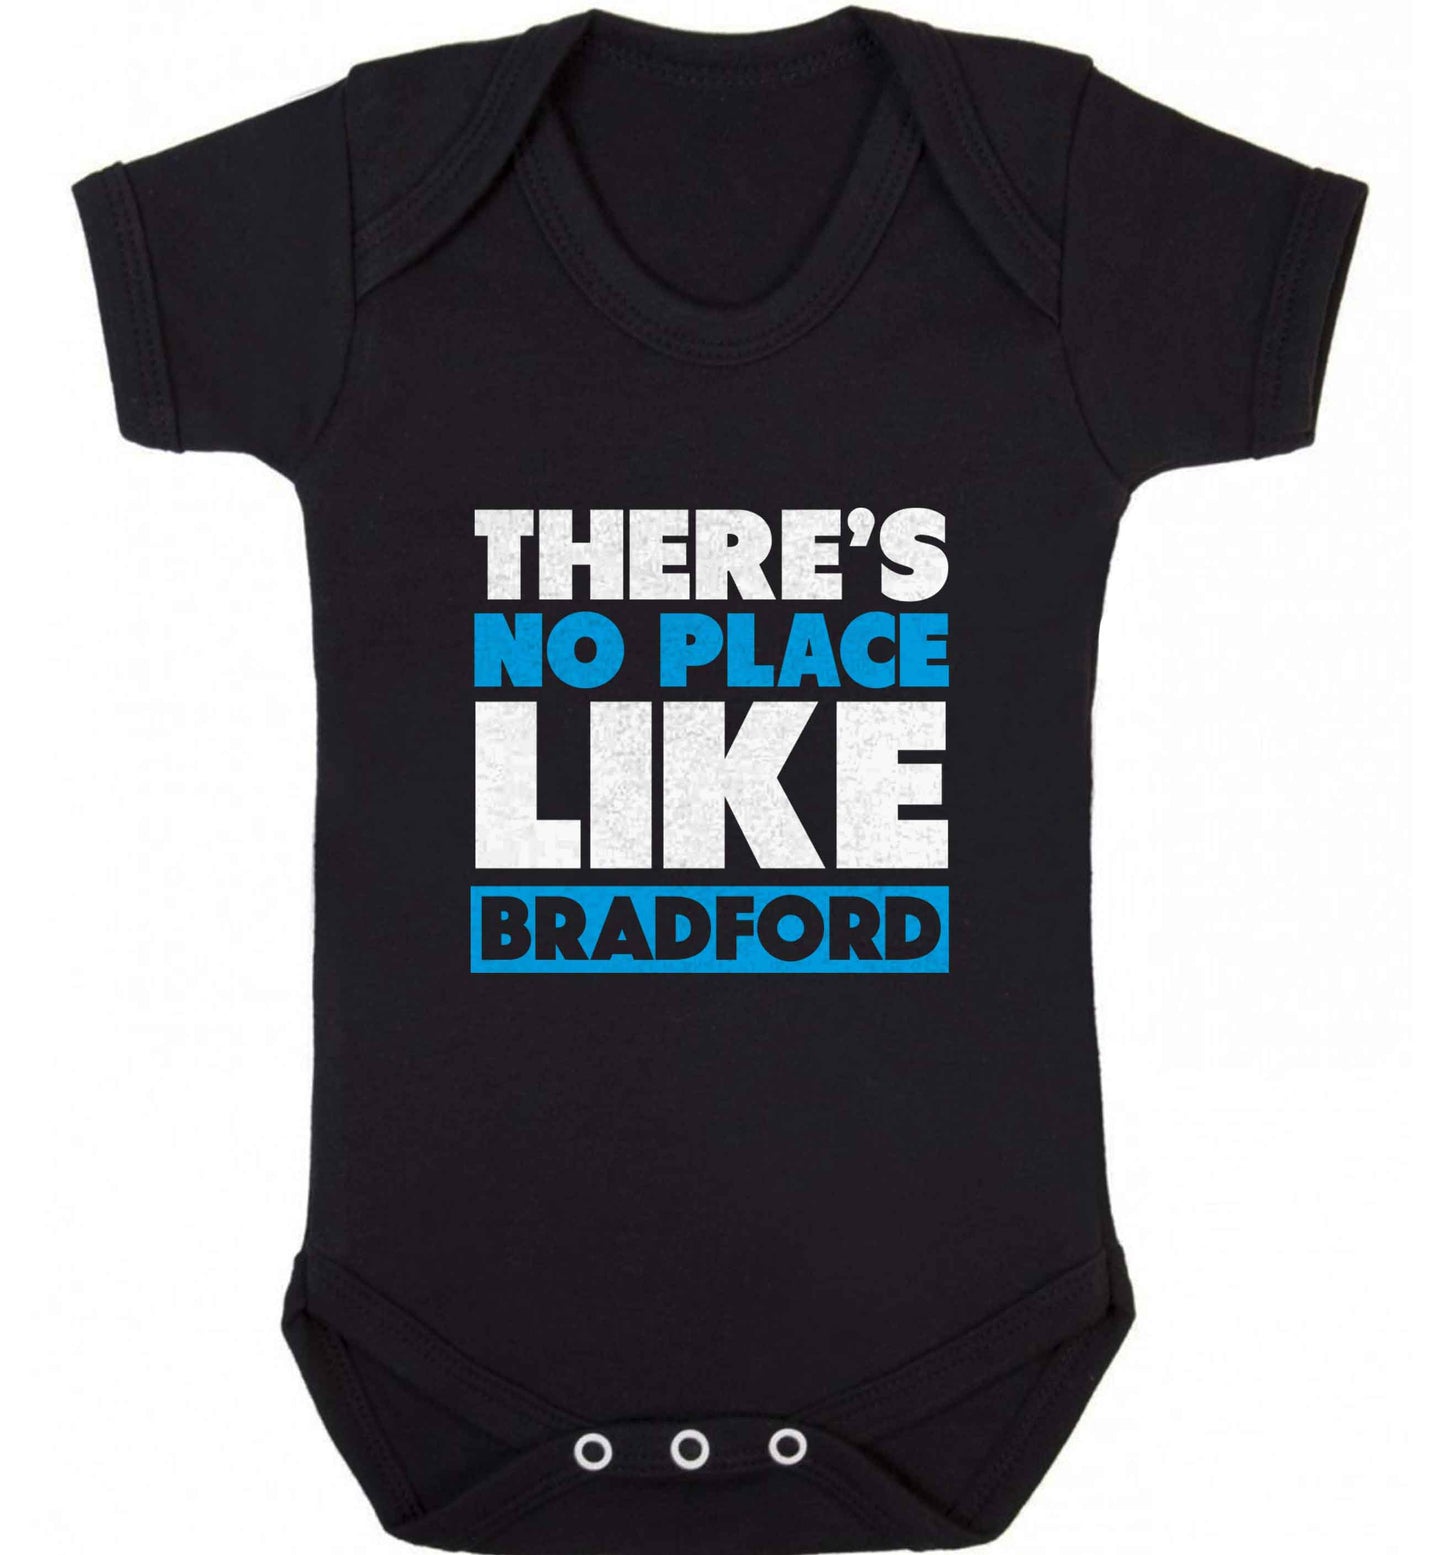 There's no place like Bradford baby vest black 18-24 months